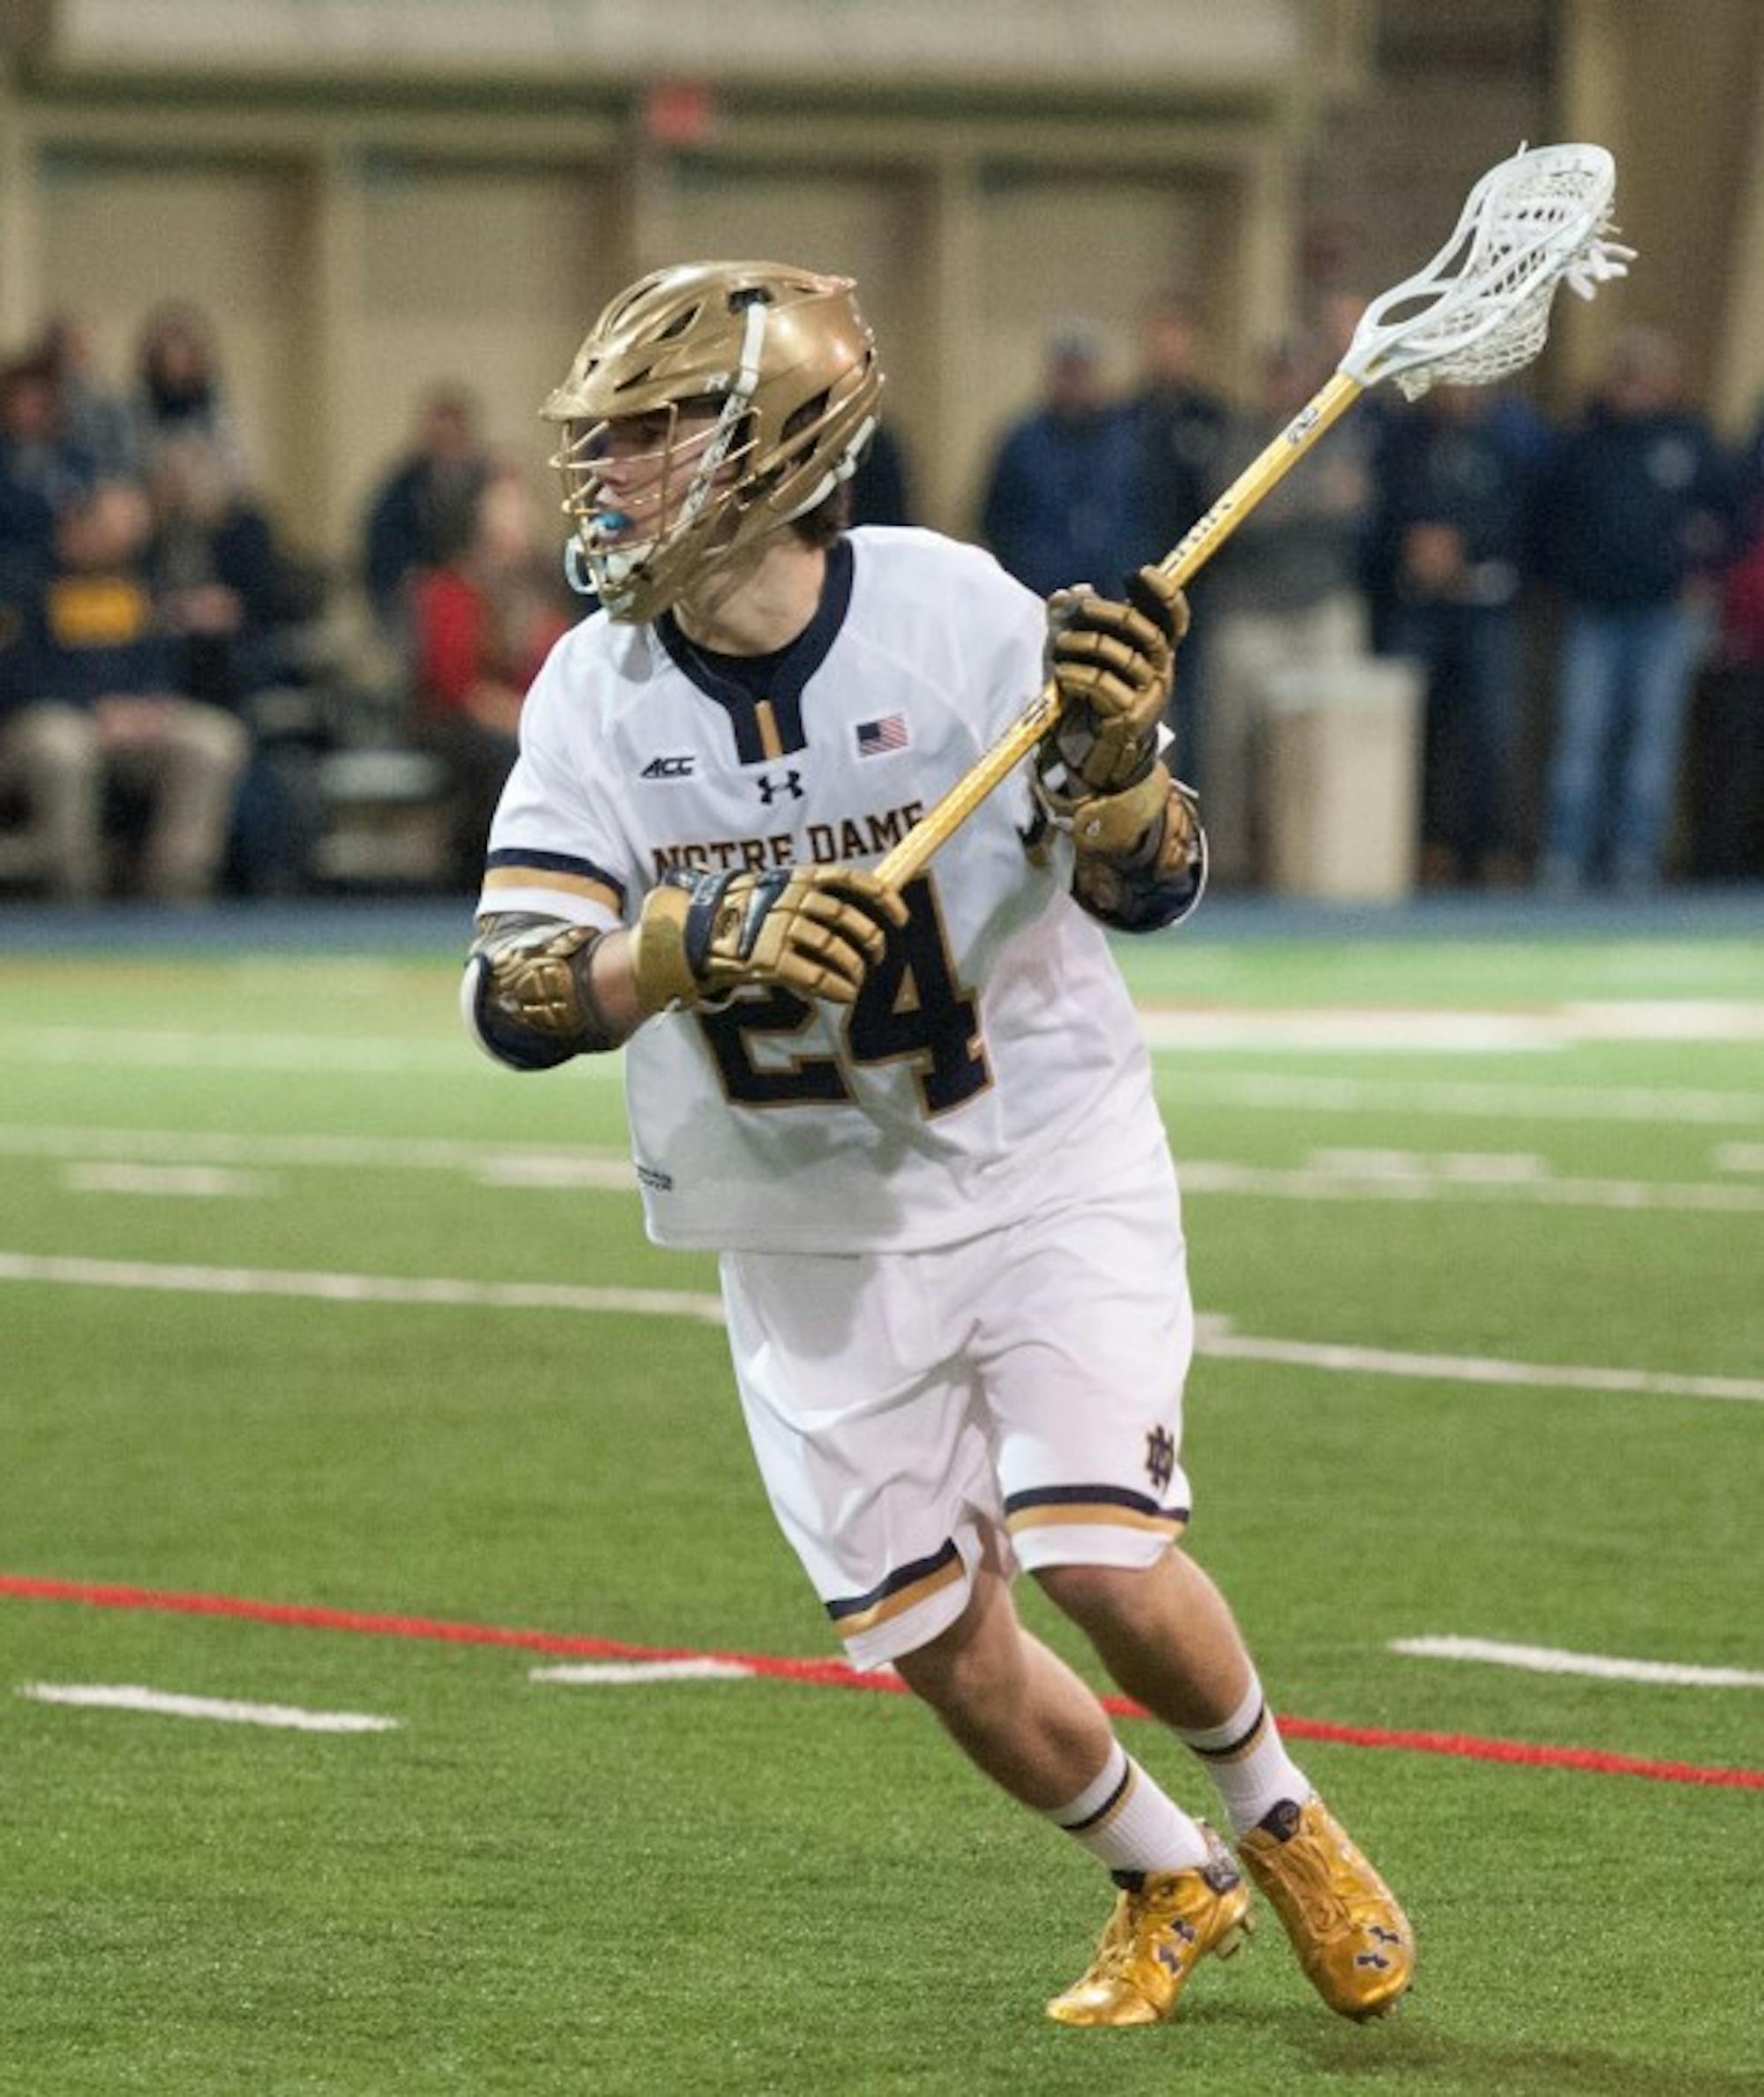 Irish freshman attack Mikey Wynne searches for an opening during Notre Dame’s 14-12 win over Georgetown on Saturday.